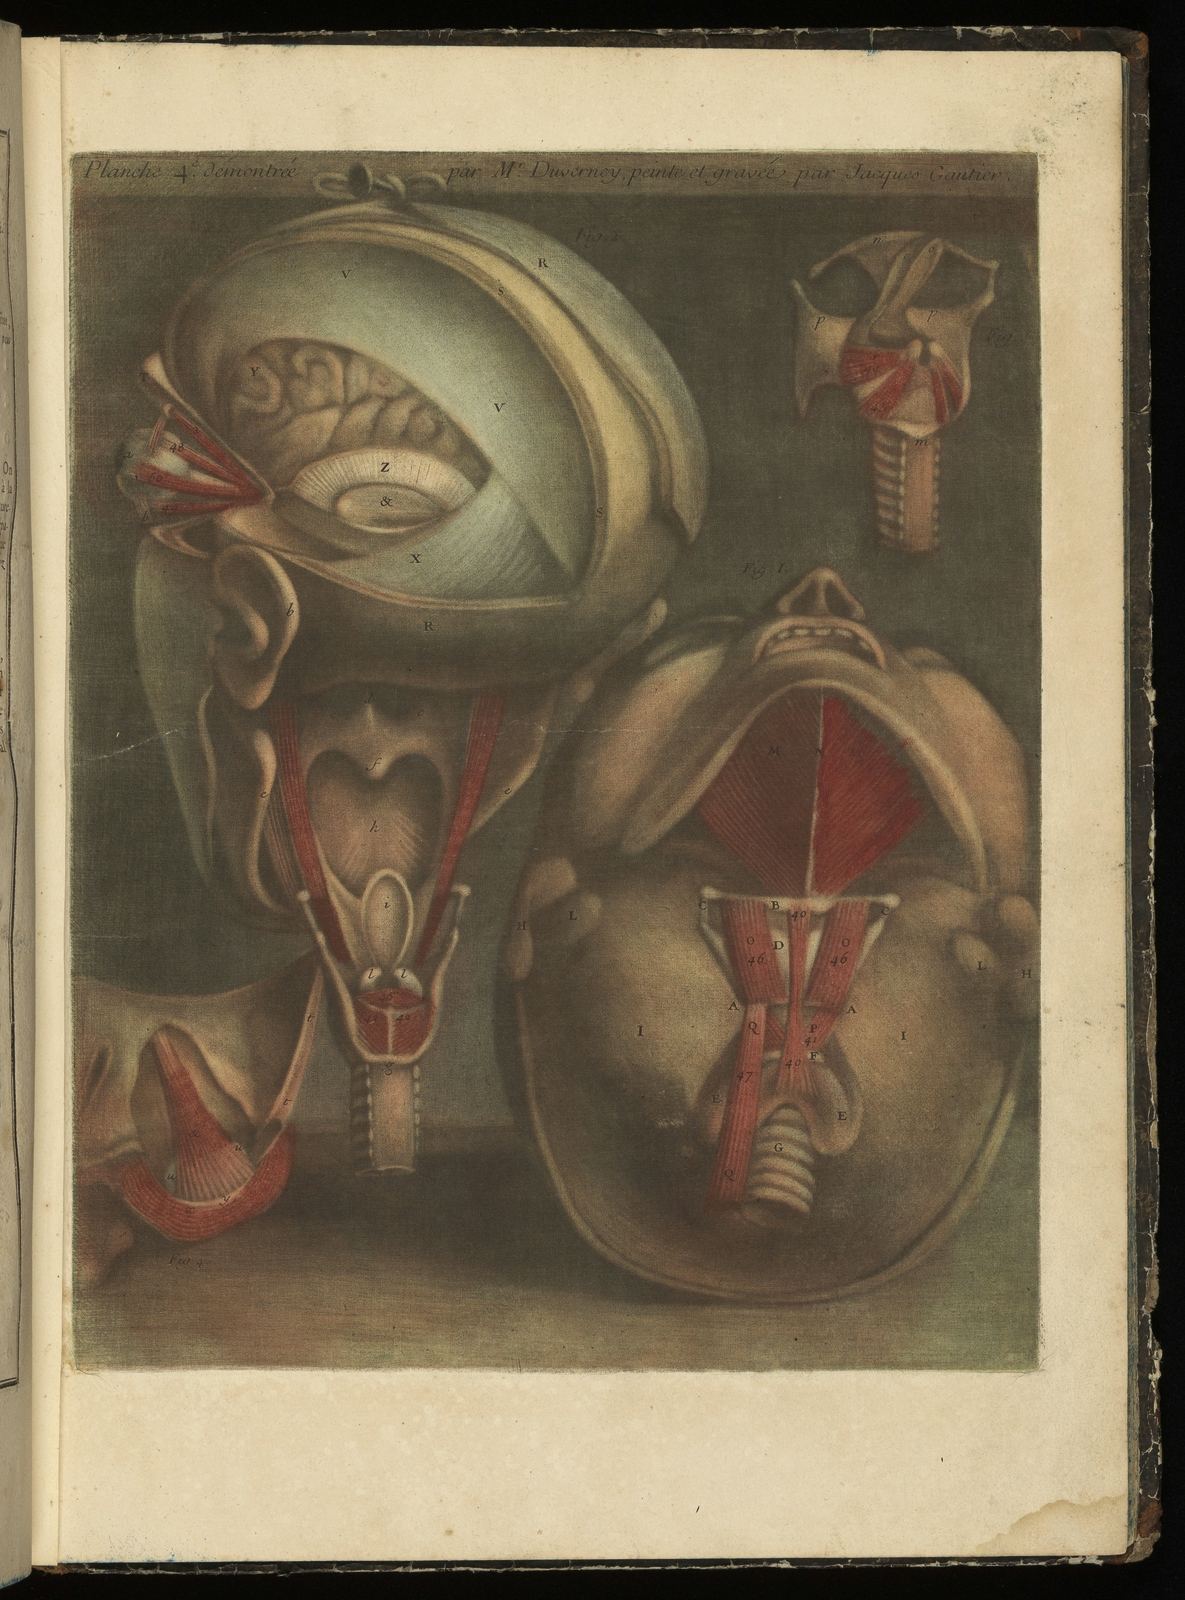 Colour engravings of the human head from behind and below.